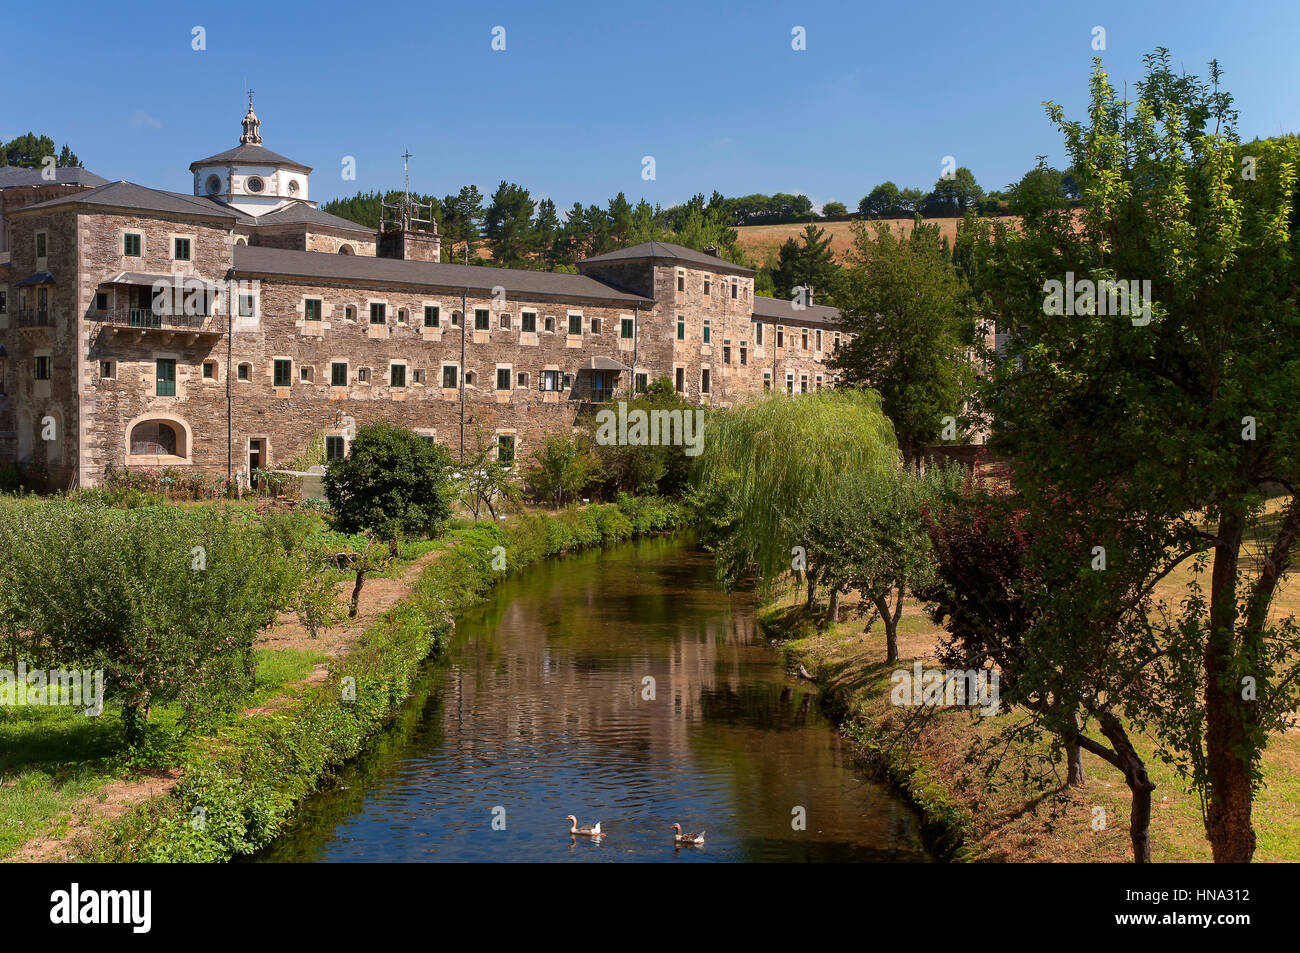 Monastery of St. Julian (founded in the 6th century) and Sarria river, Samos, Lugo province, Region of Galicia, Spain, Europe Stock Photo